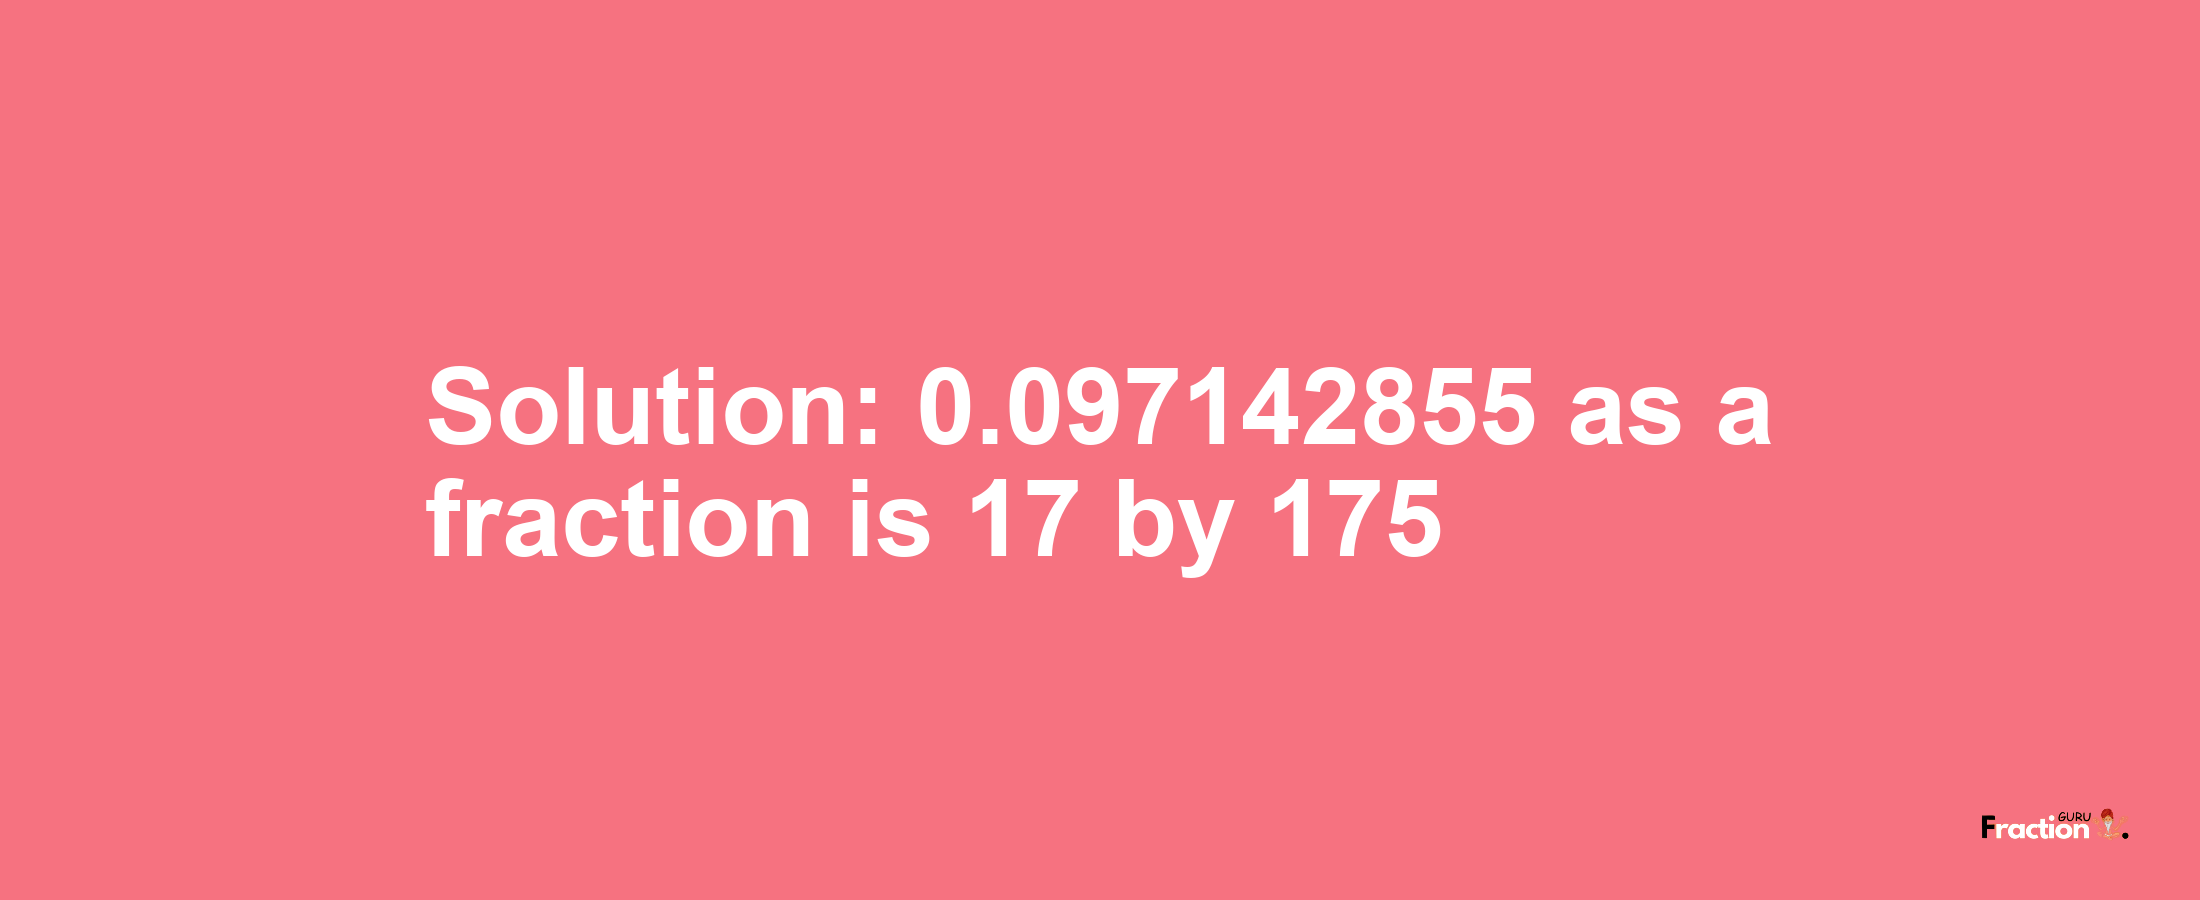 Solution:0.097142855 as a fraction is 17/175